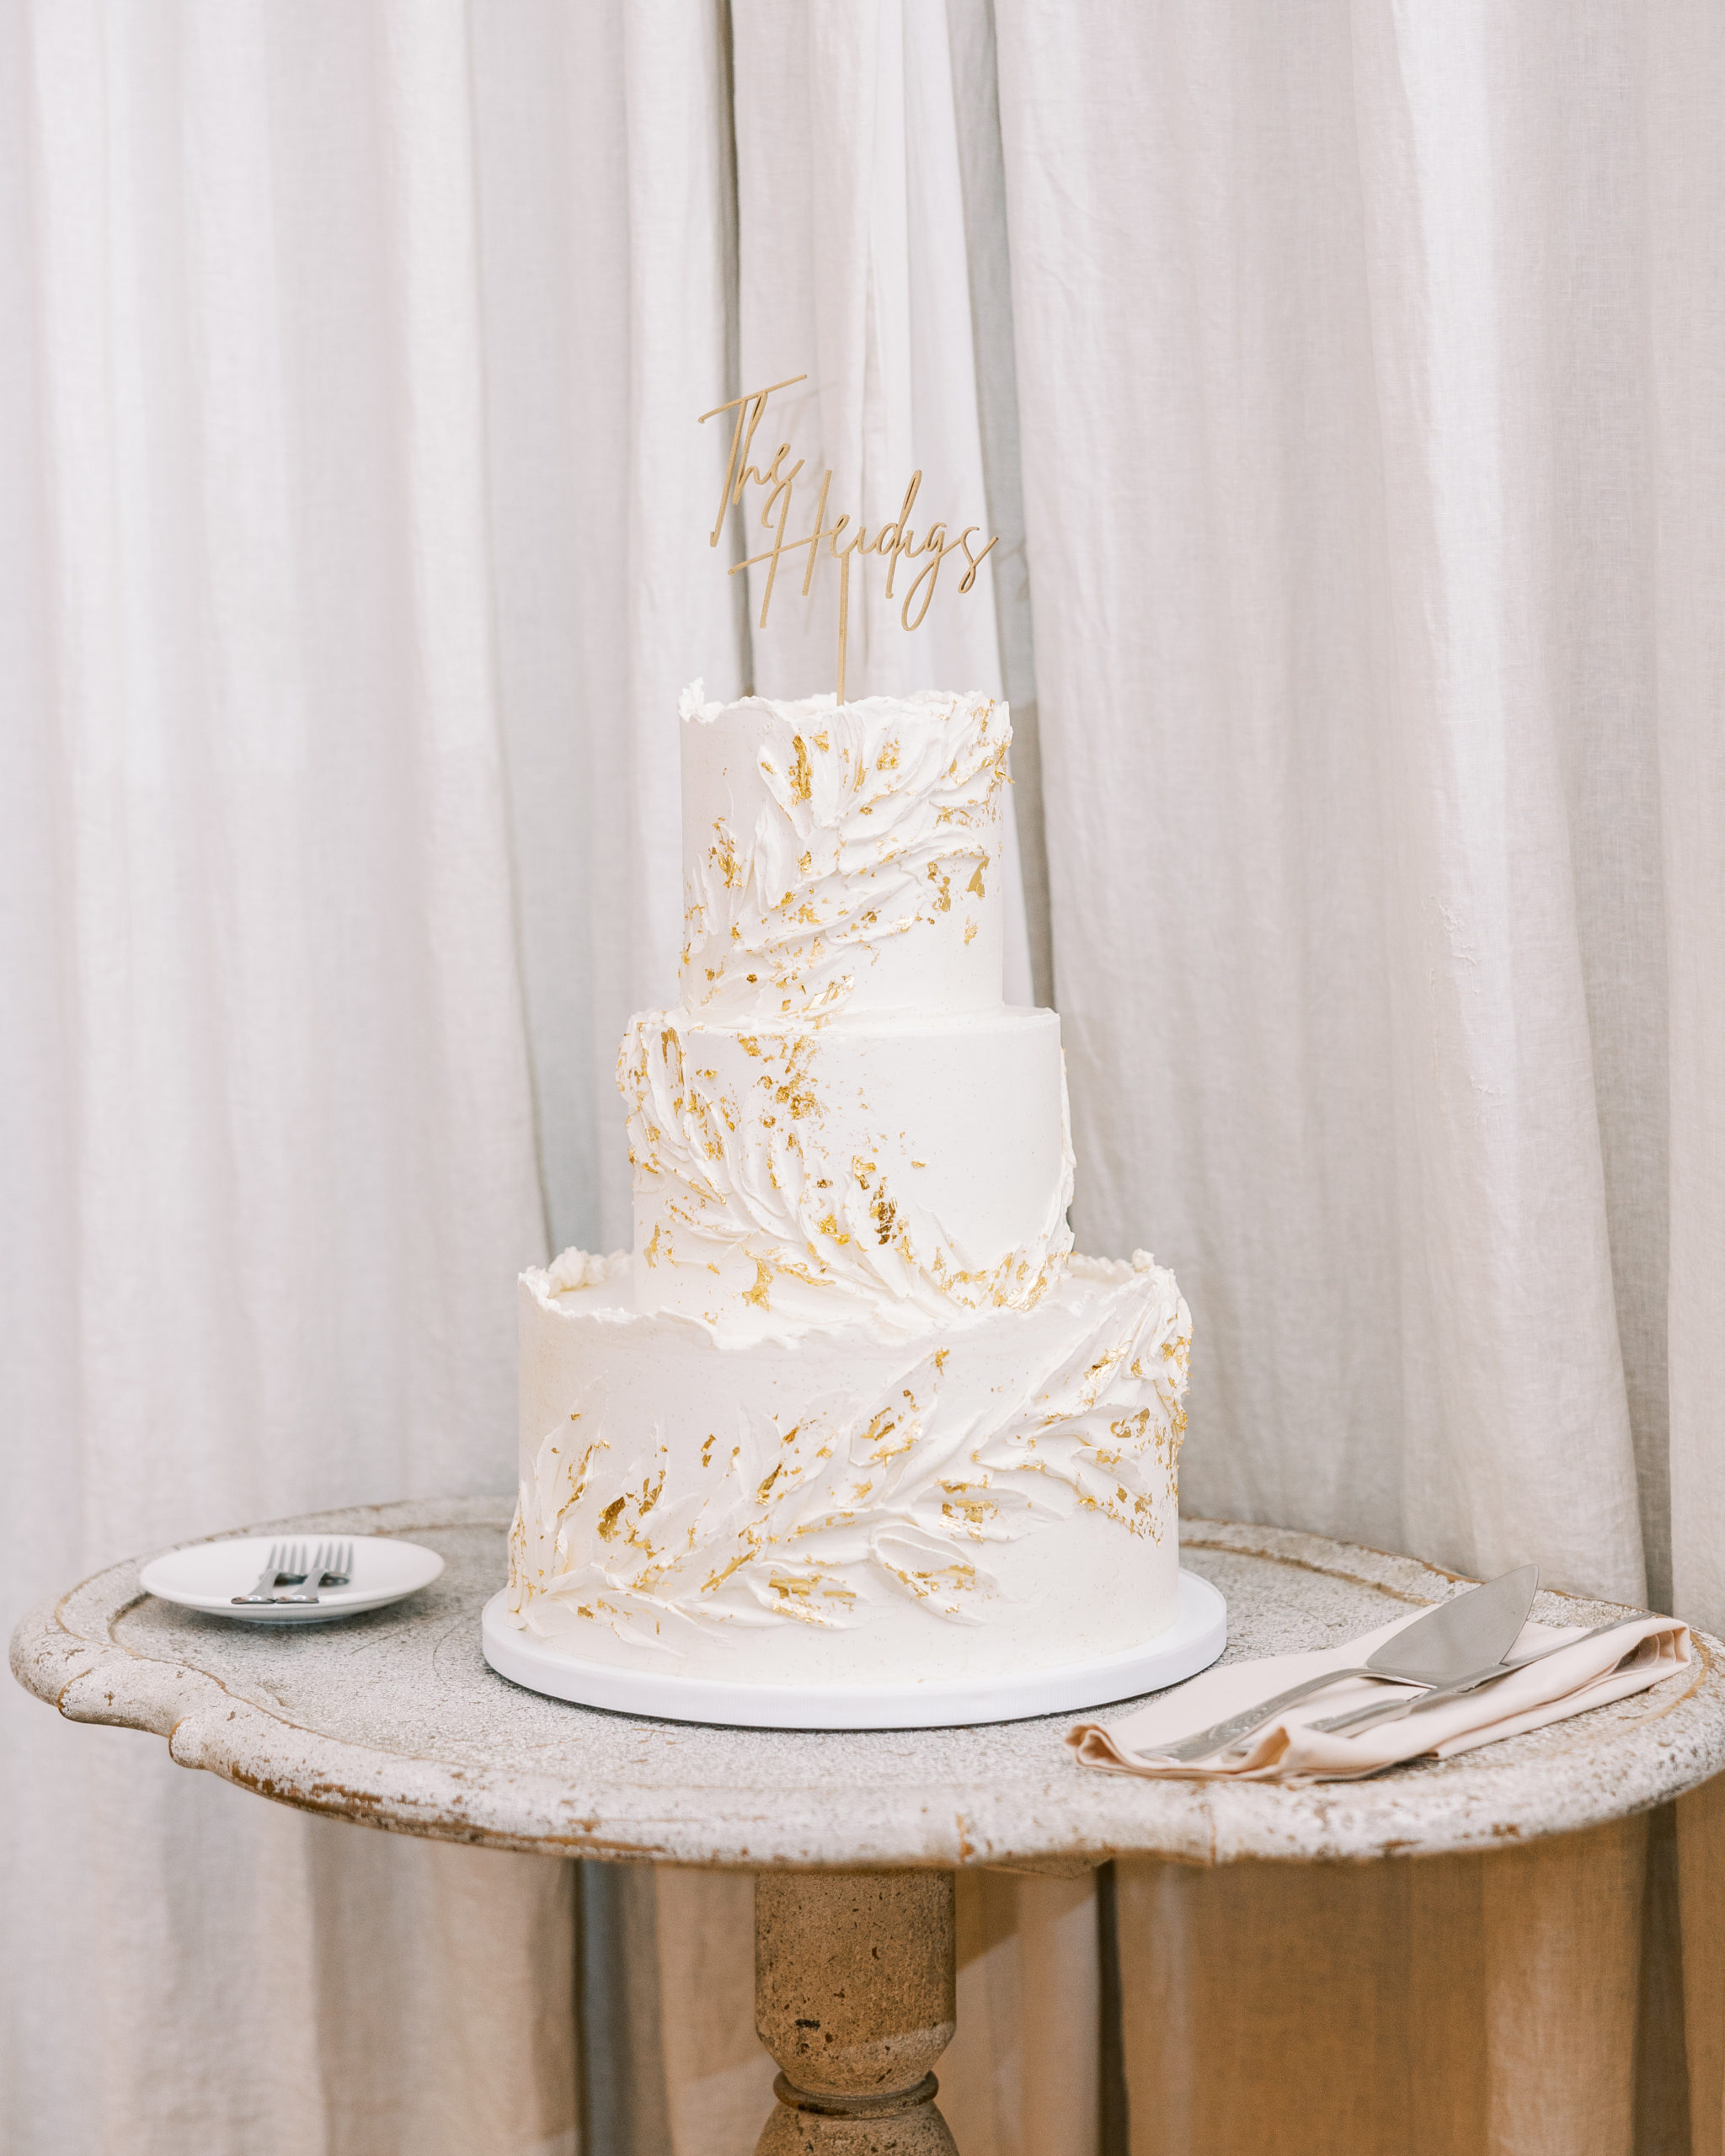 3-tiered white wedding cake with golden specks resembling flowers on top of rustic stone round table 